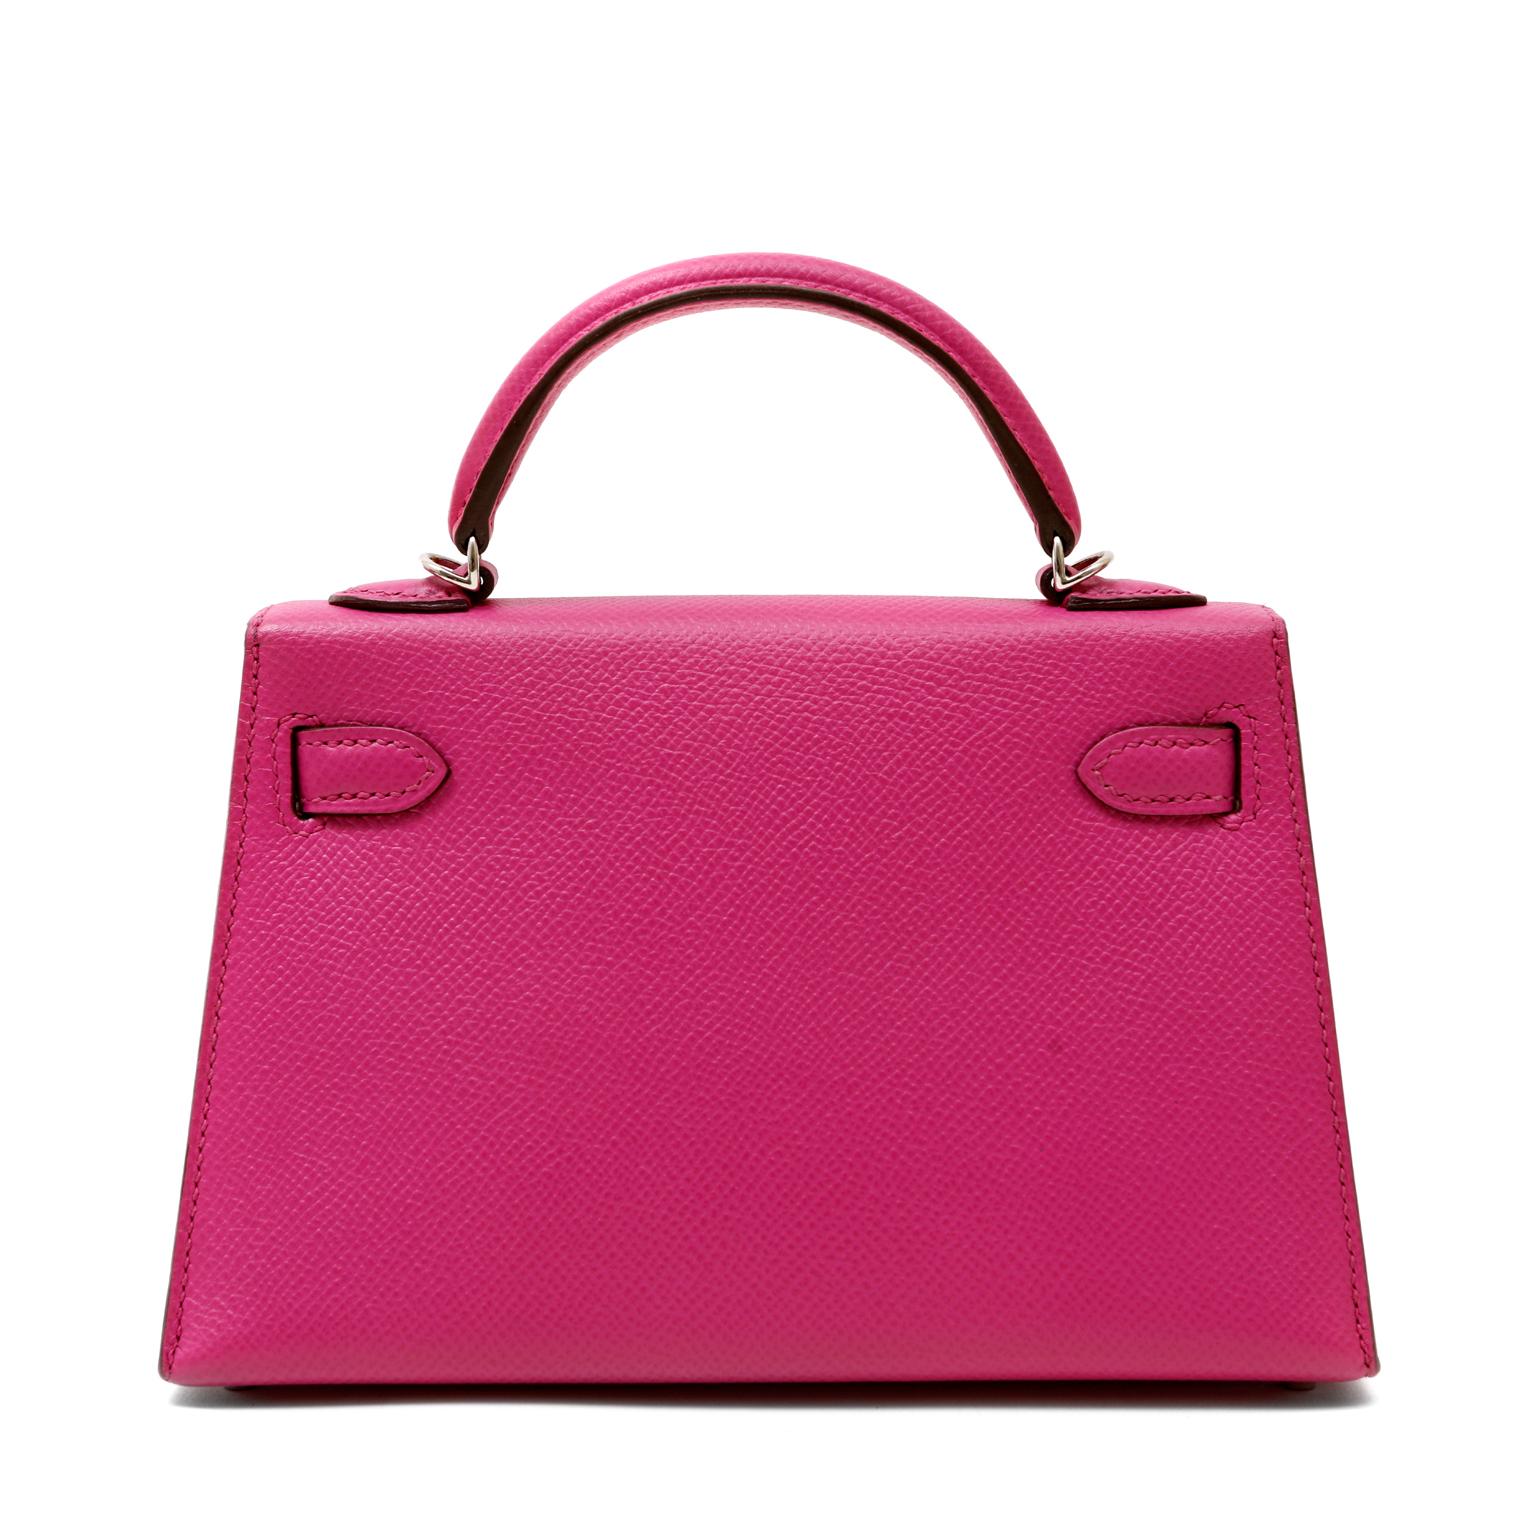 This authentic Hermès Shocking Pink Epsom Mini Kelly is pristine with the protective plastic intact on the hardware.  Petite and feminine, the crossbody Kelly is very collectible in the 20 cm silhouette.
Vivid pink Epsom leather is textured and